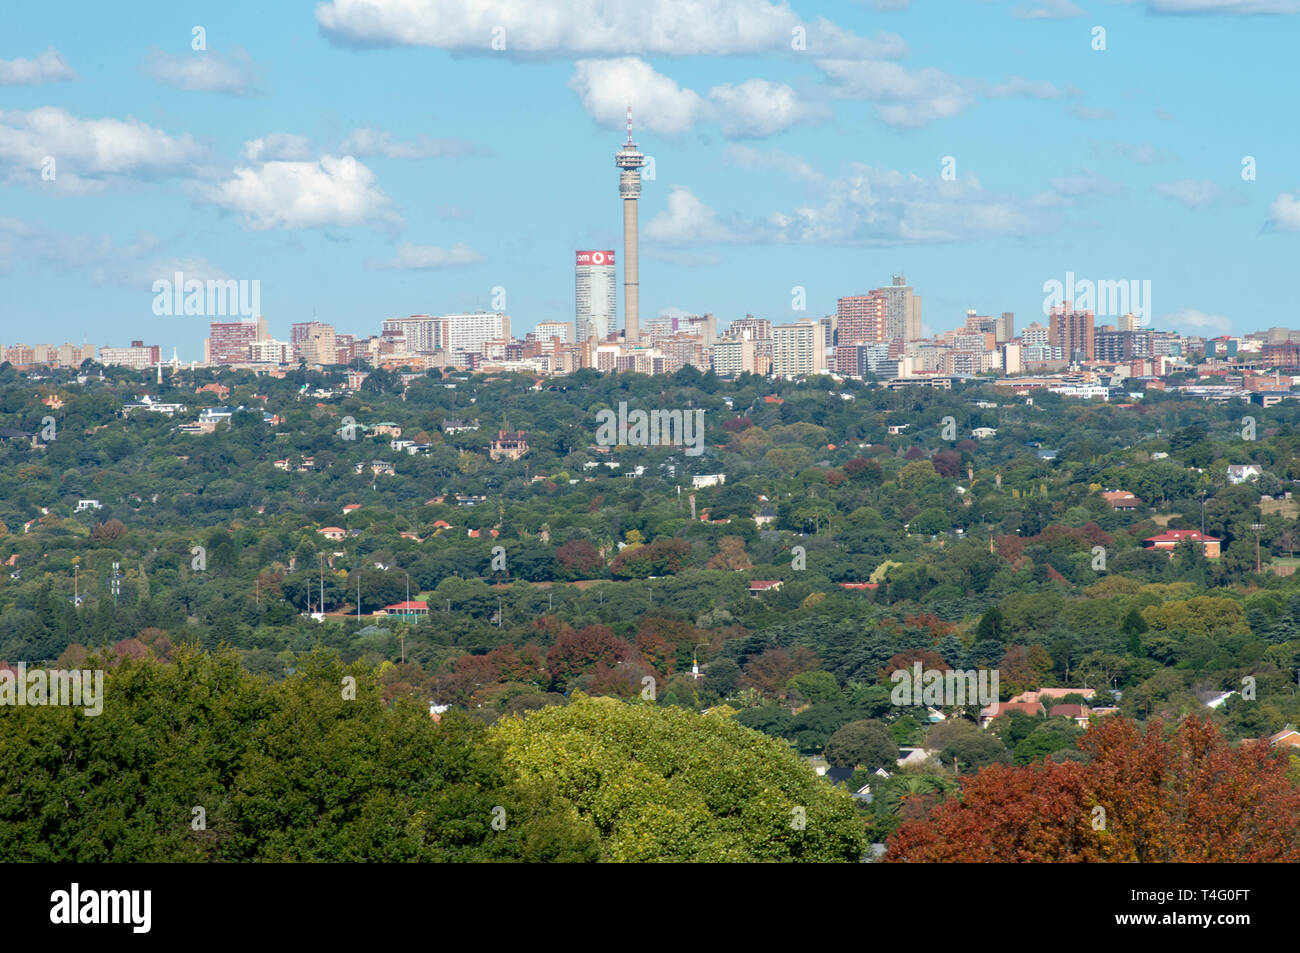 Johannesburg, South Africa, 16th April, 2019. Autumn leaves have started to colour the green sea of trees that surround the Johannesburg skyline, Tuesday afternoon. Credit: Eva-Lotta Jansson/Alamy Stock Photo